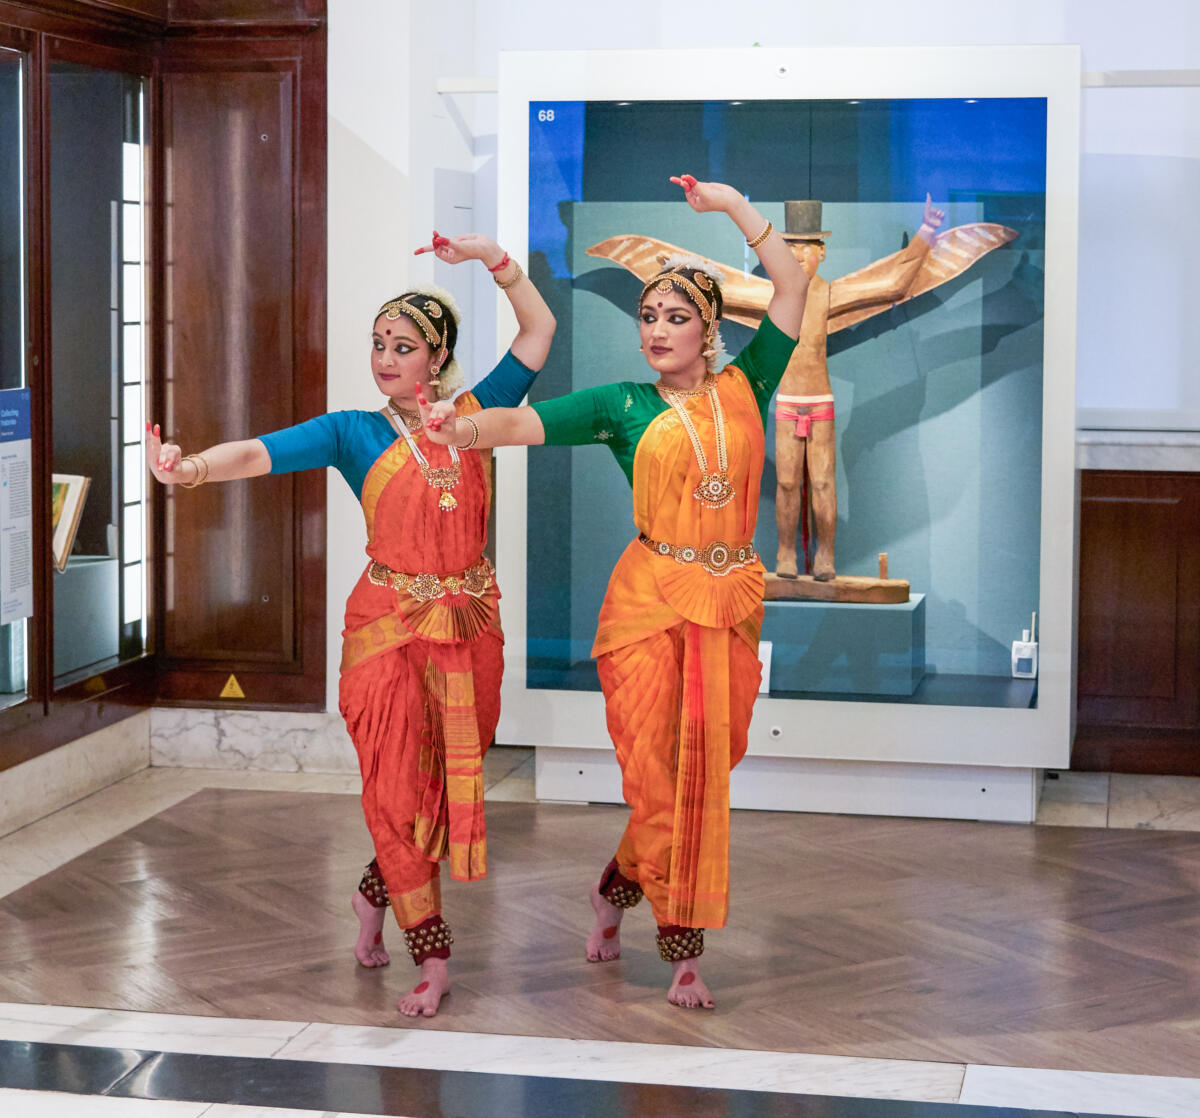 two South Asian dancers in a museum setting